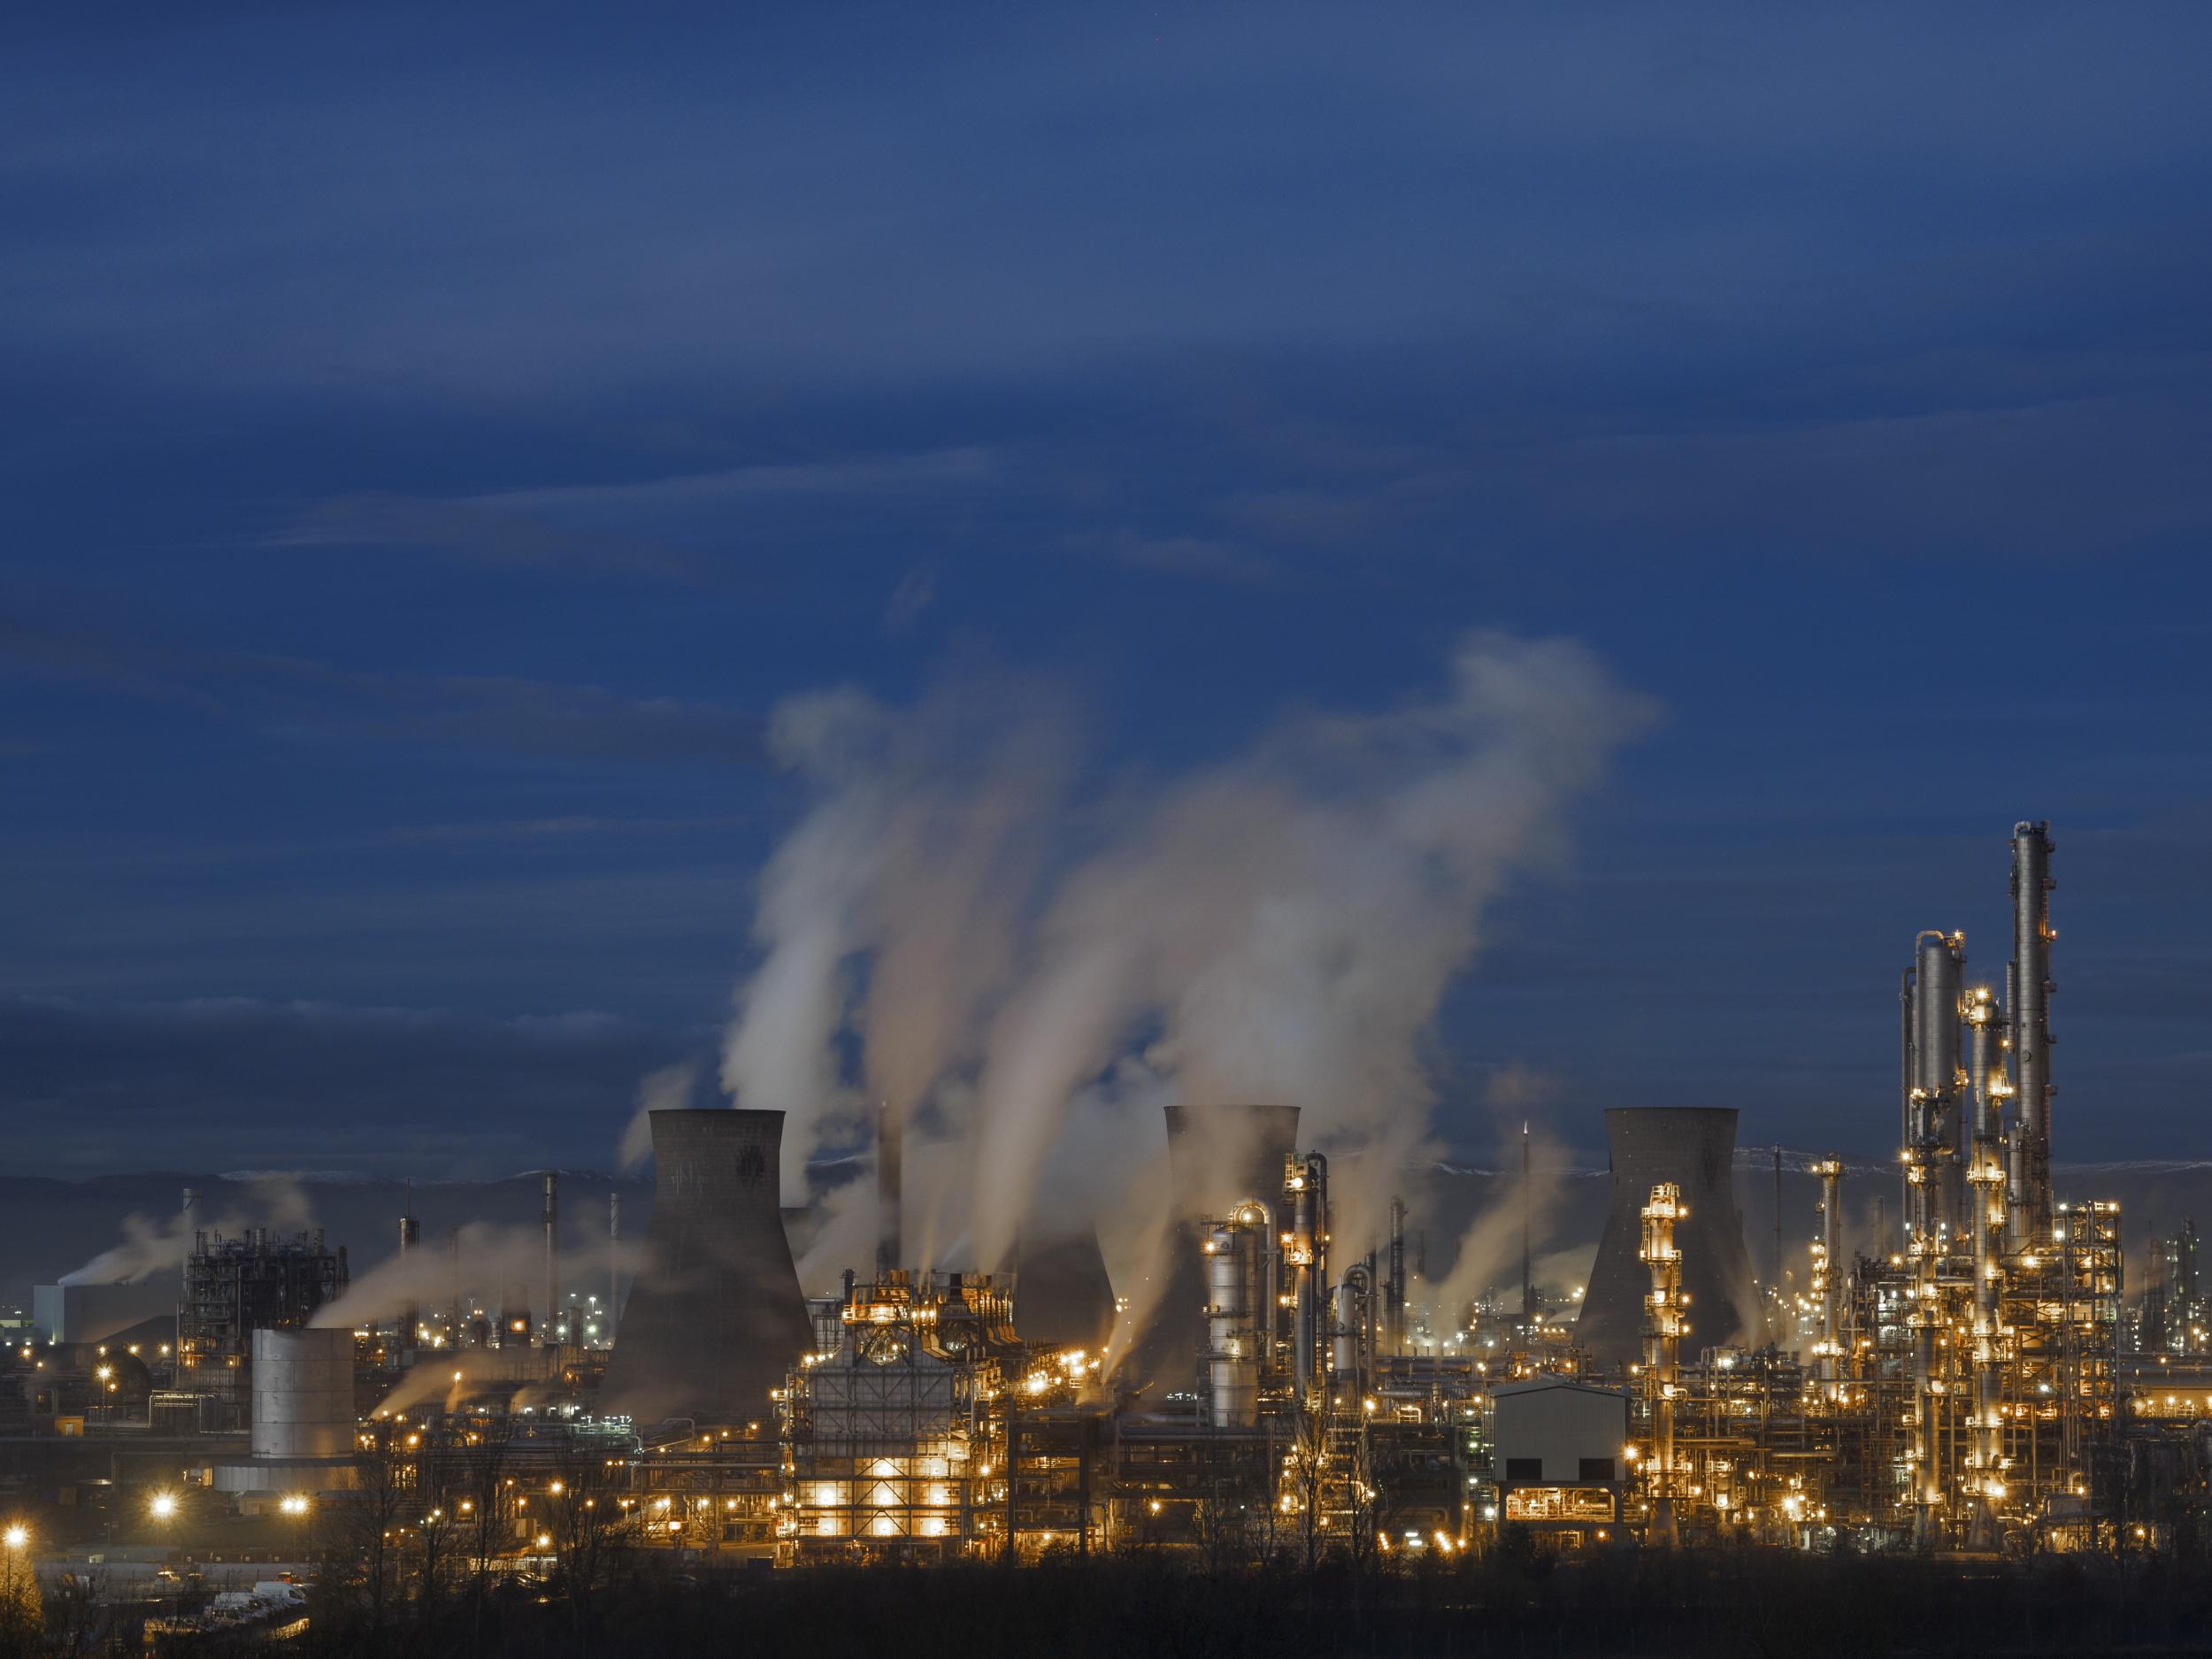 The Ineos petrochemical plant at Grangemouth in Scotland